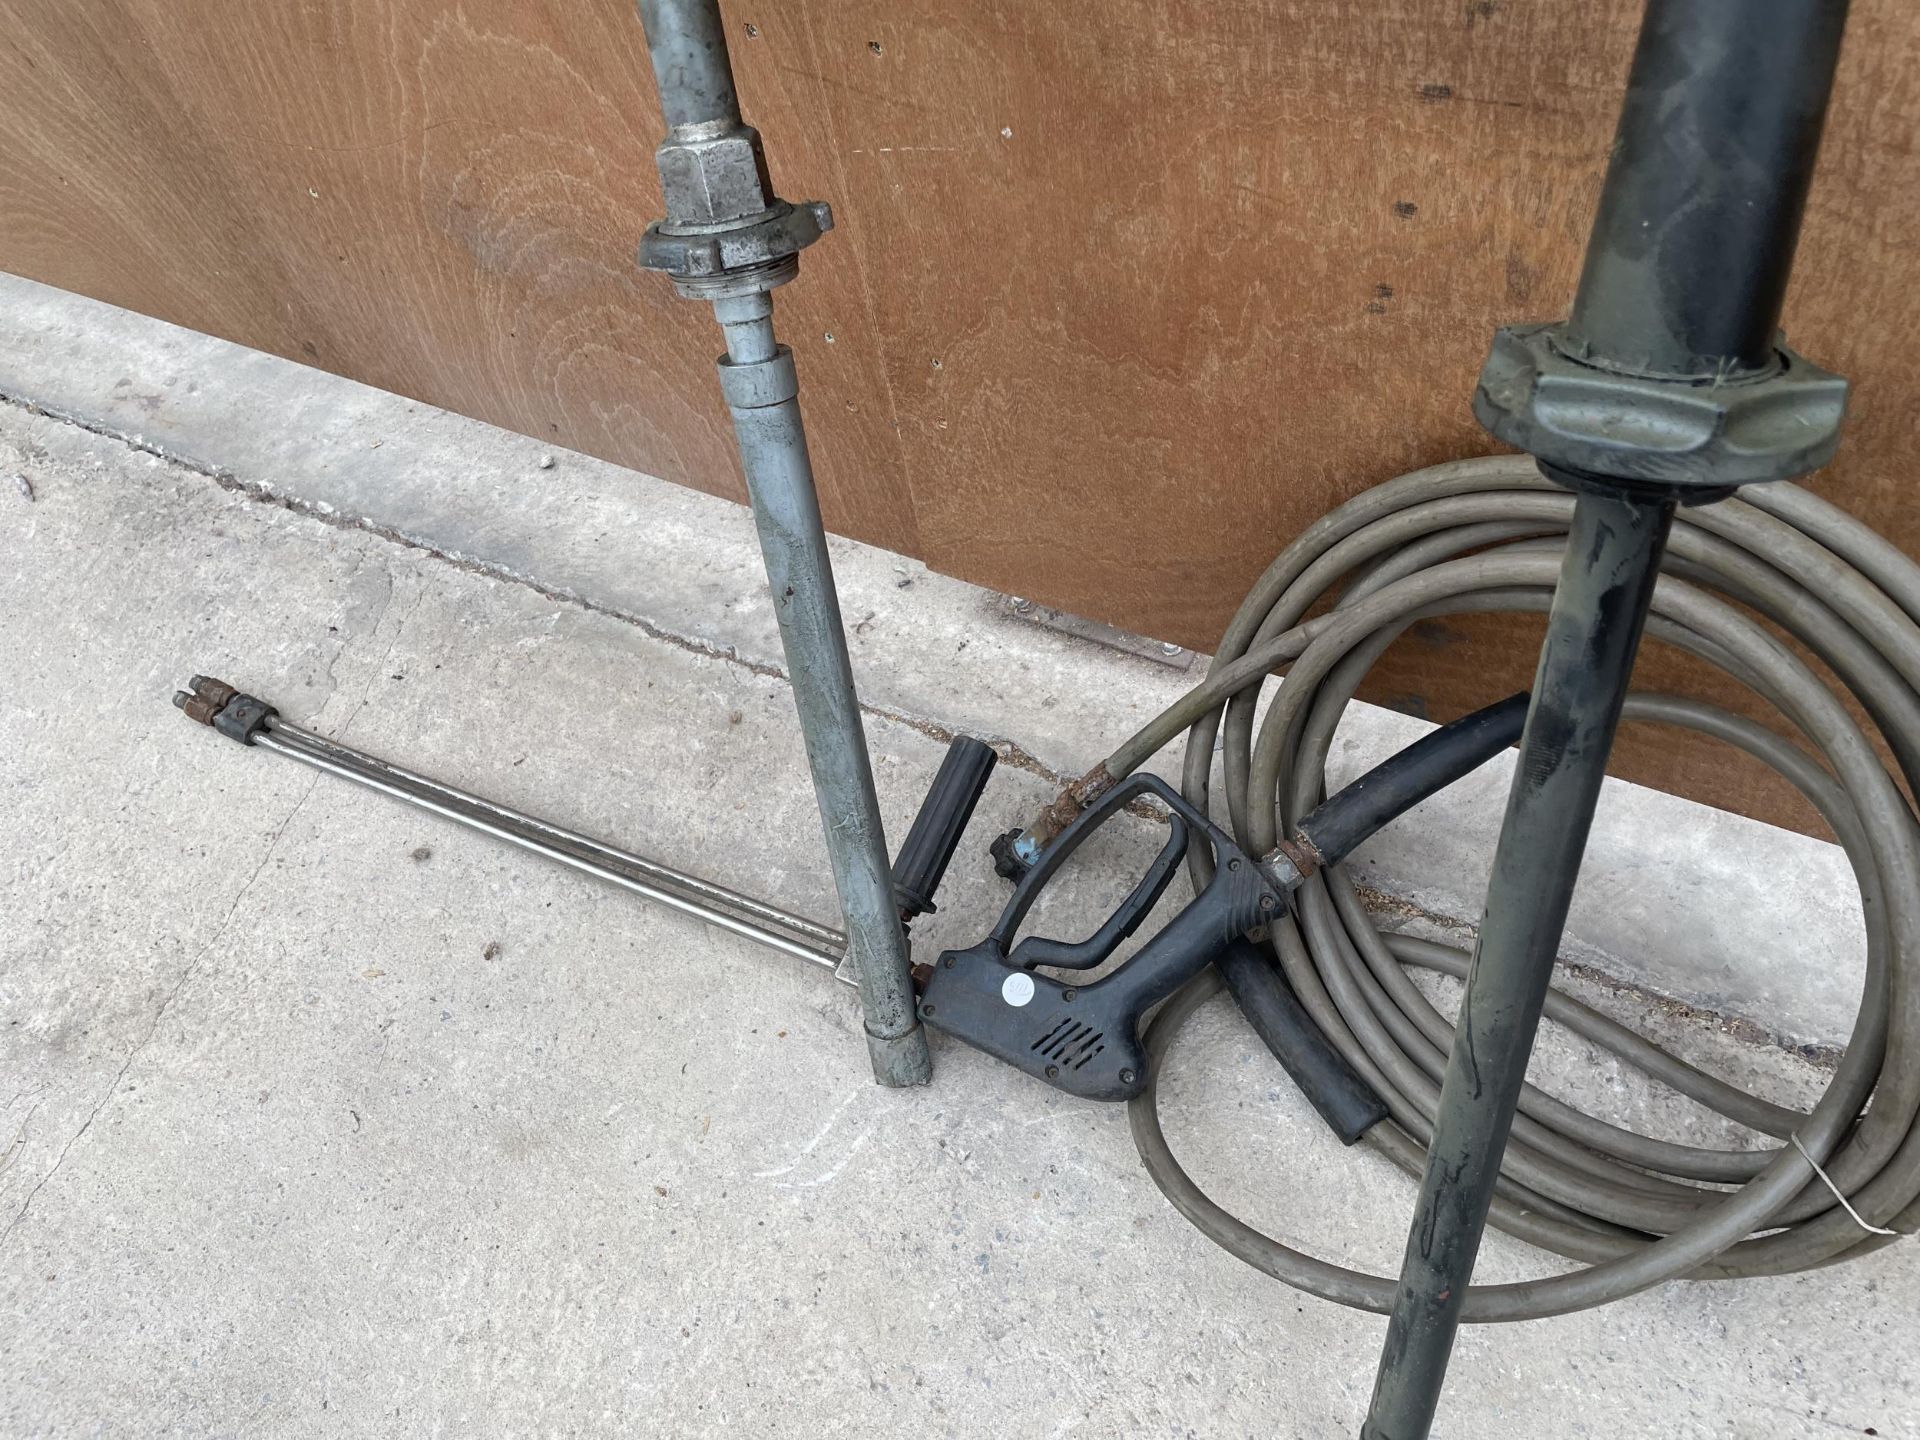 TWO BARREL PUMPS AND A PRESSURE WASHER HOSE AND LANCE - Image 3 of 3